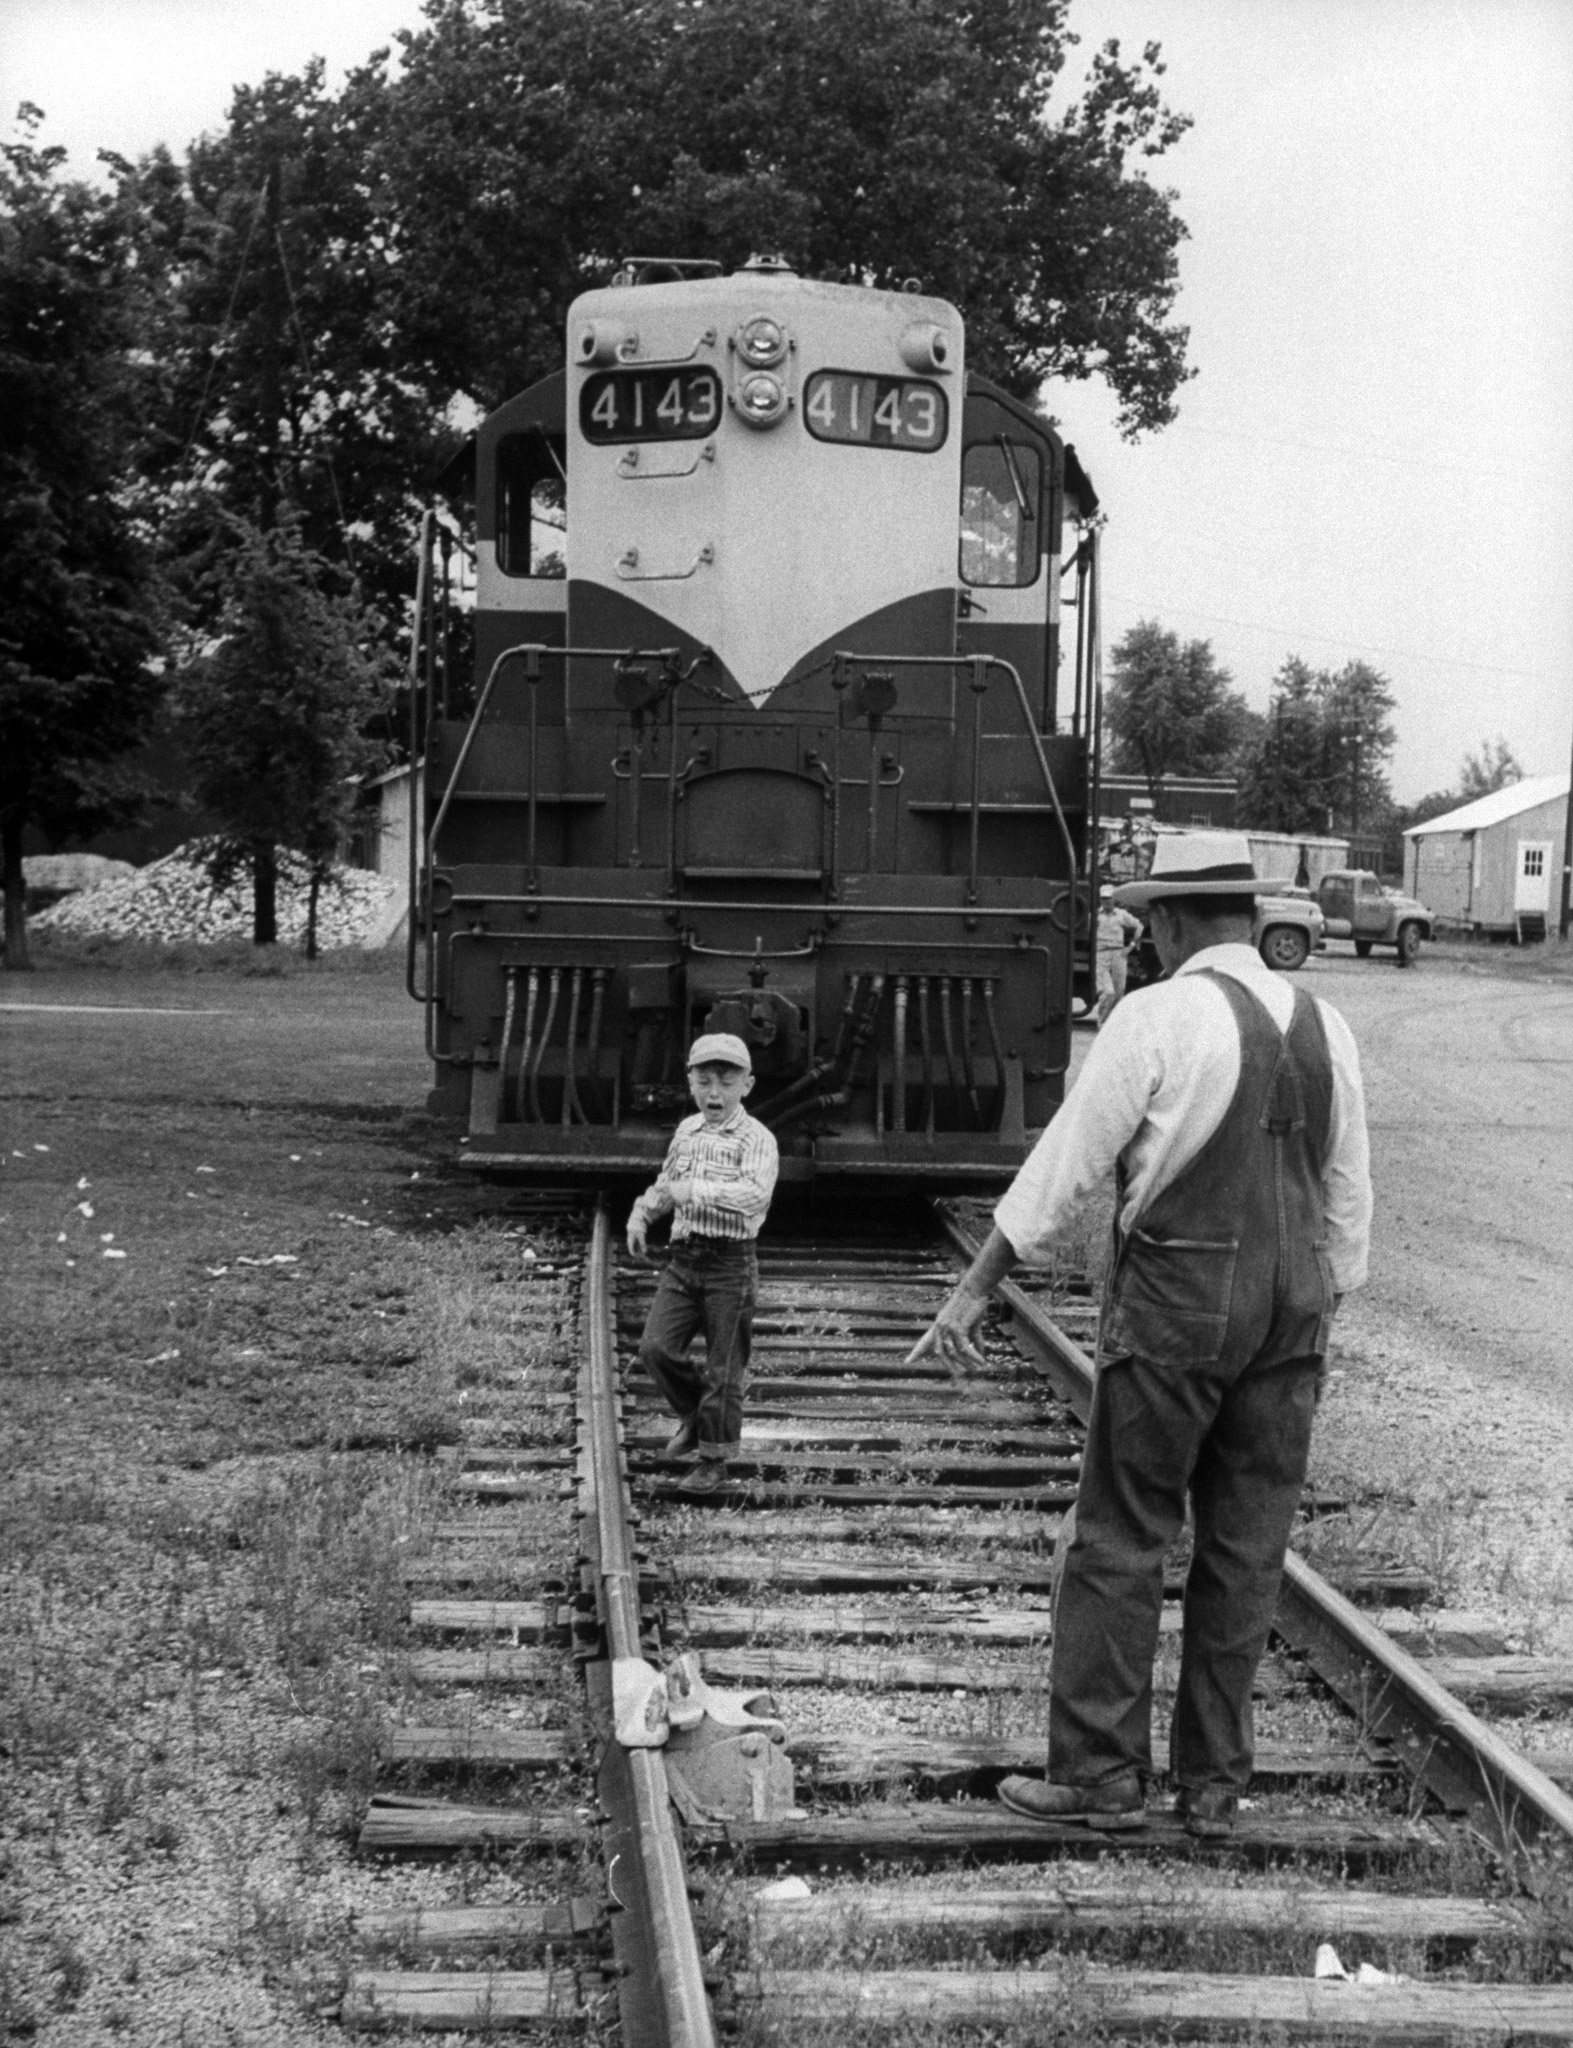 Billy Conner talking to his grandfather William near a train.